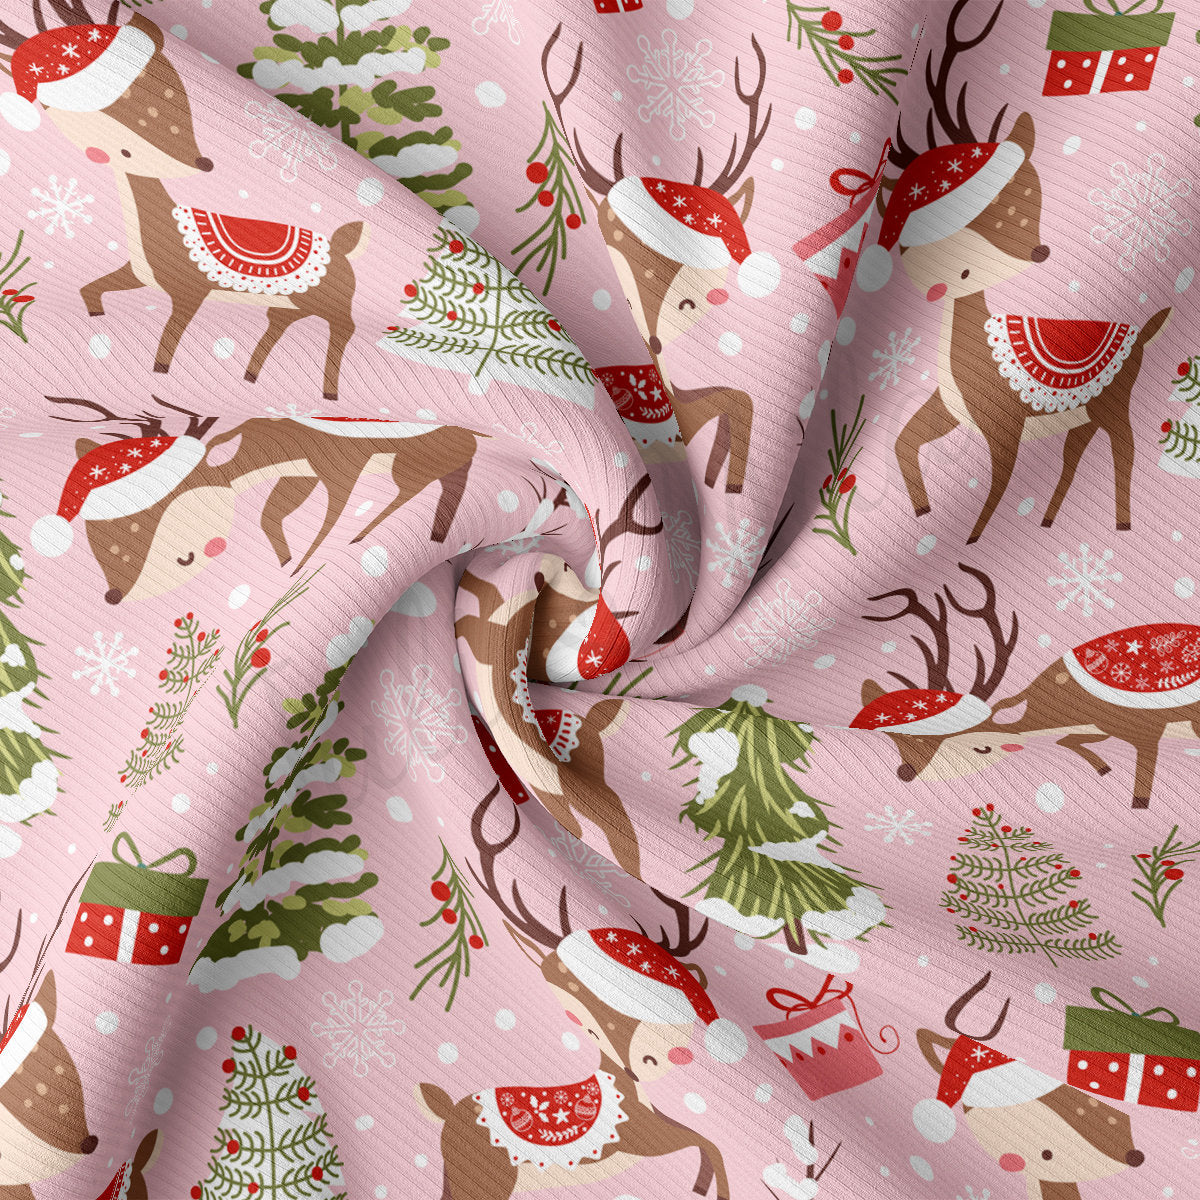 Christmas Rib Knit Fabric by the Yard Ribbed Jersey Stretchy Soft Polyester Stretch Fabric 1 Yard  RBK2182